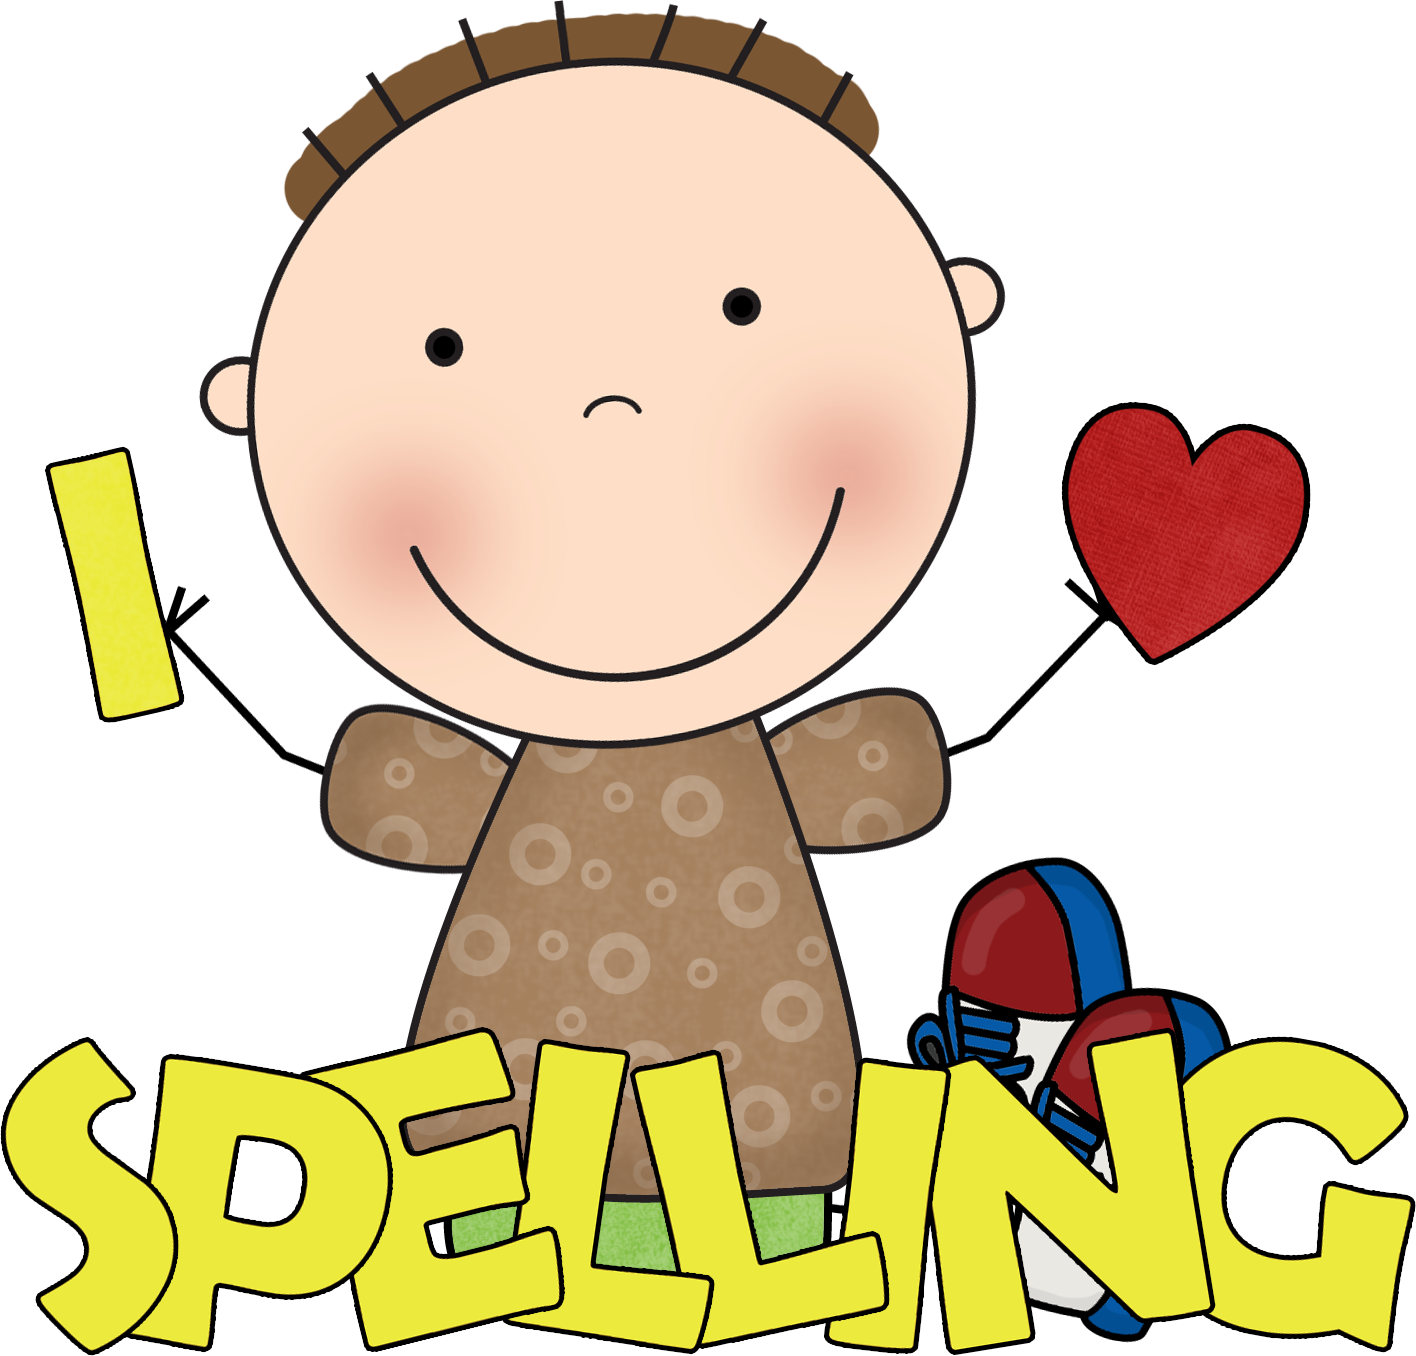 Spelling words clipart